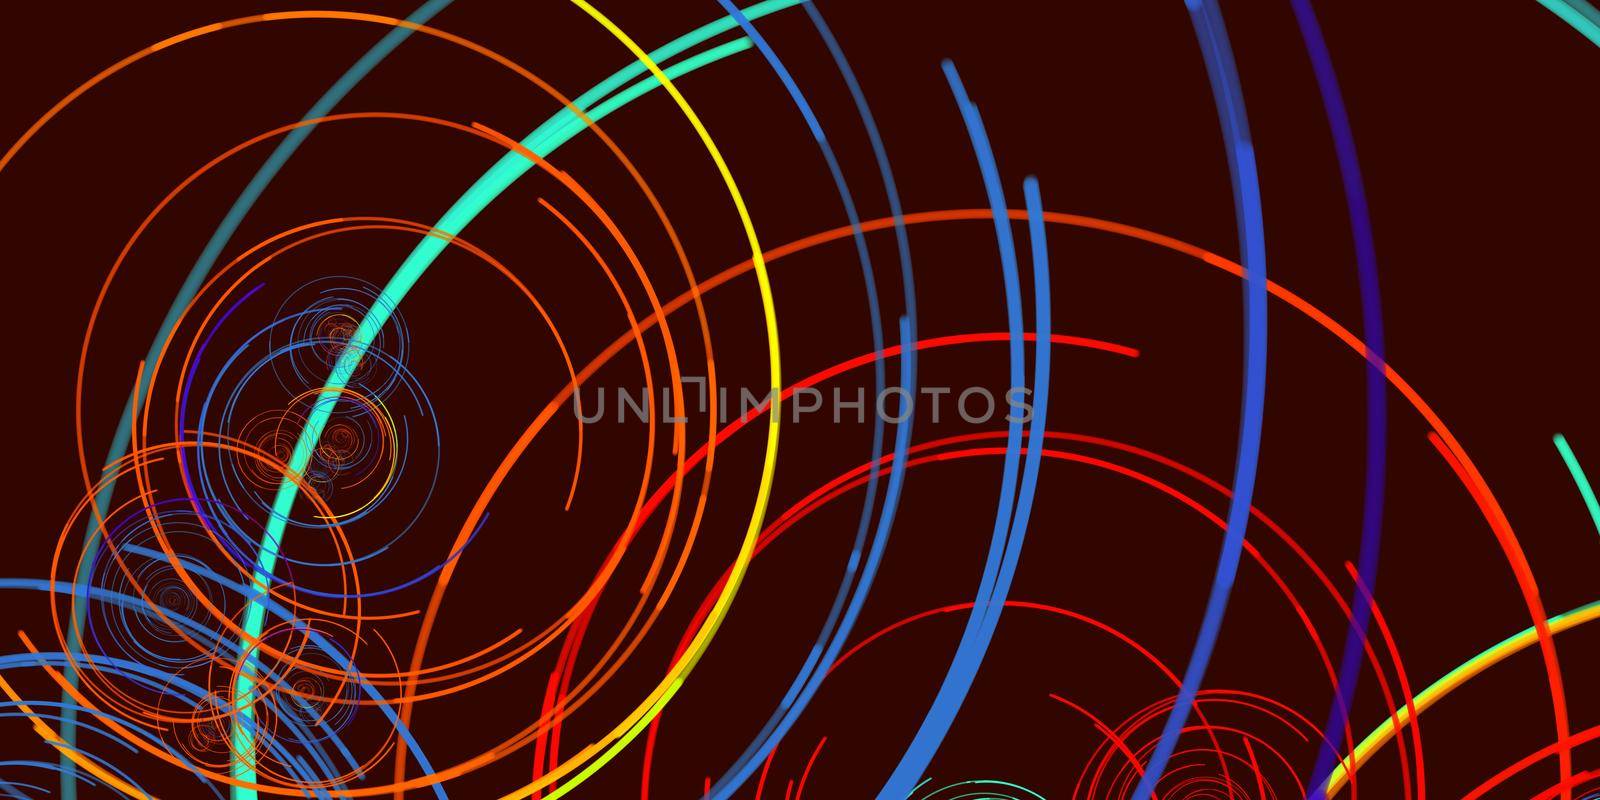 Fashion Glamor Pattern Abstract Background Concept Art